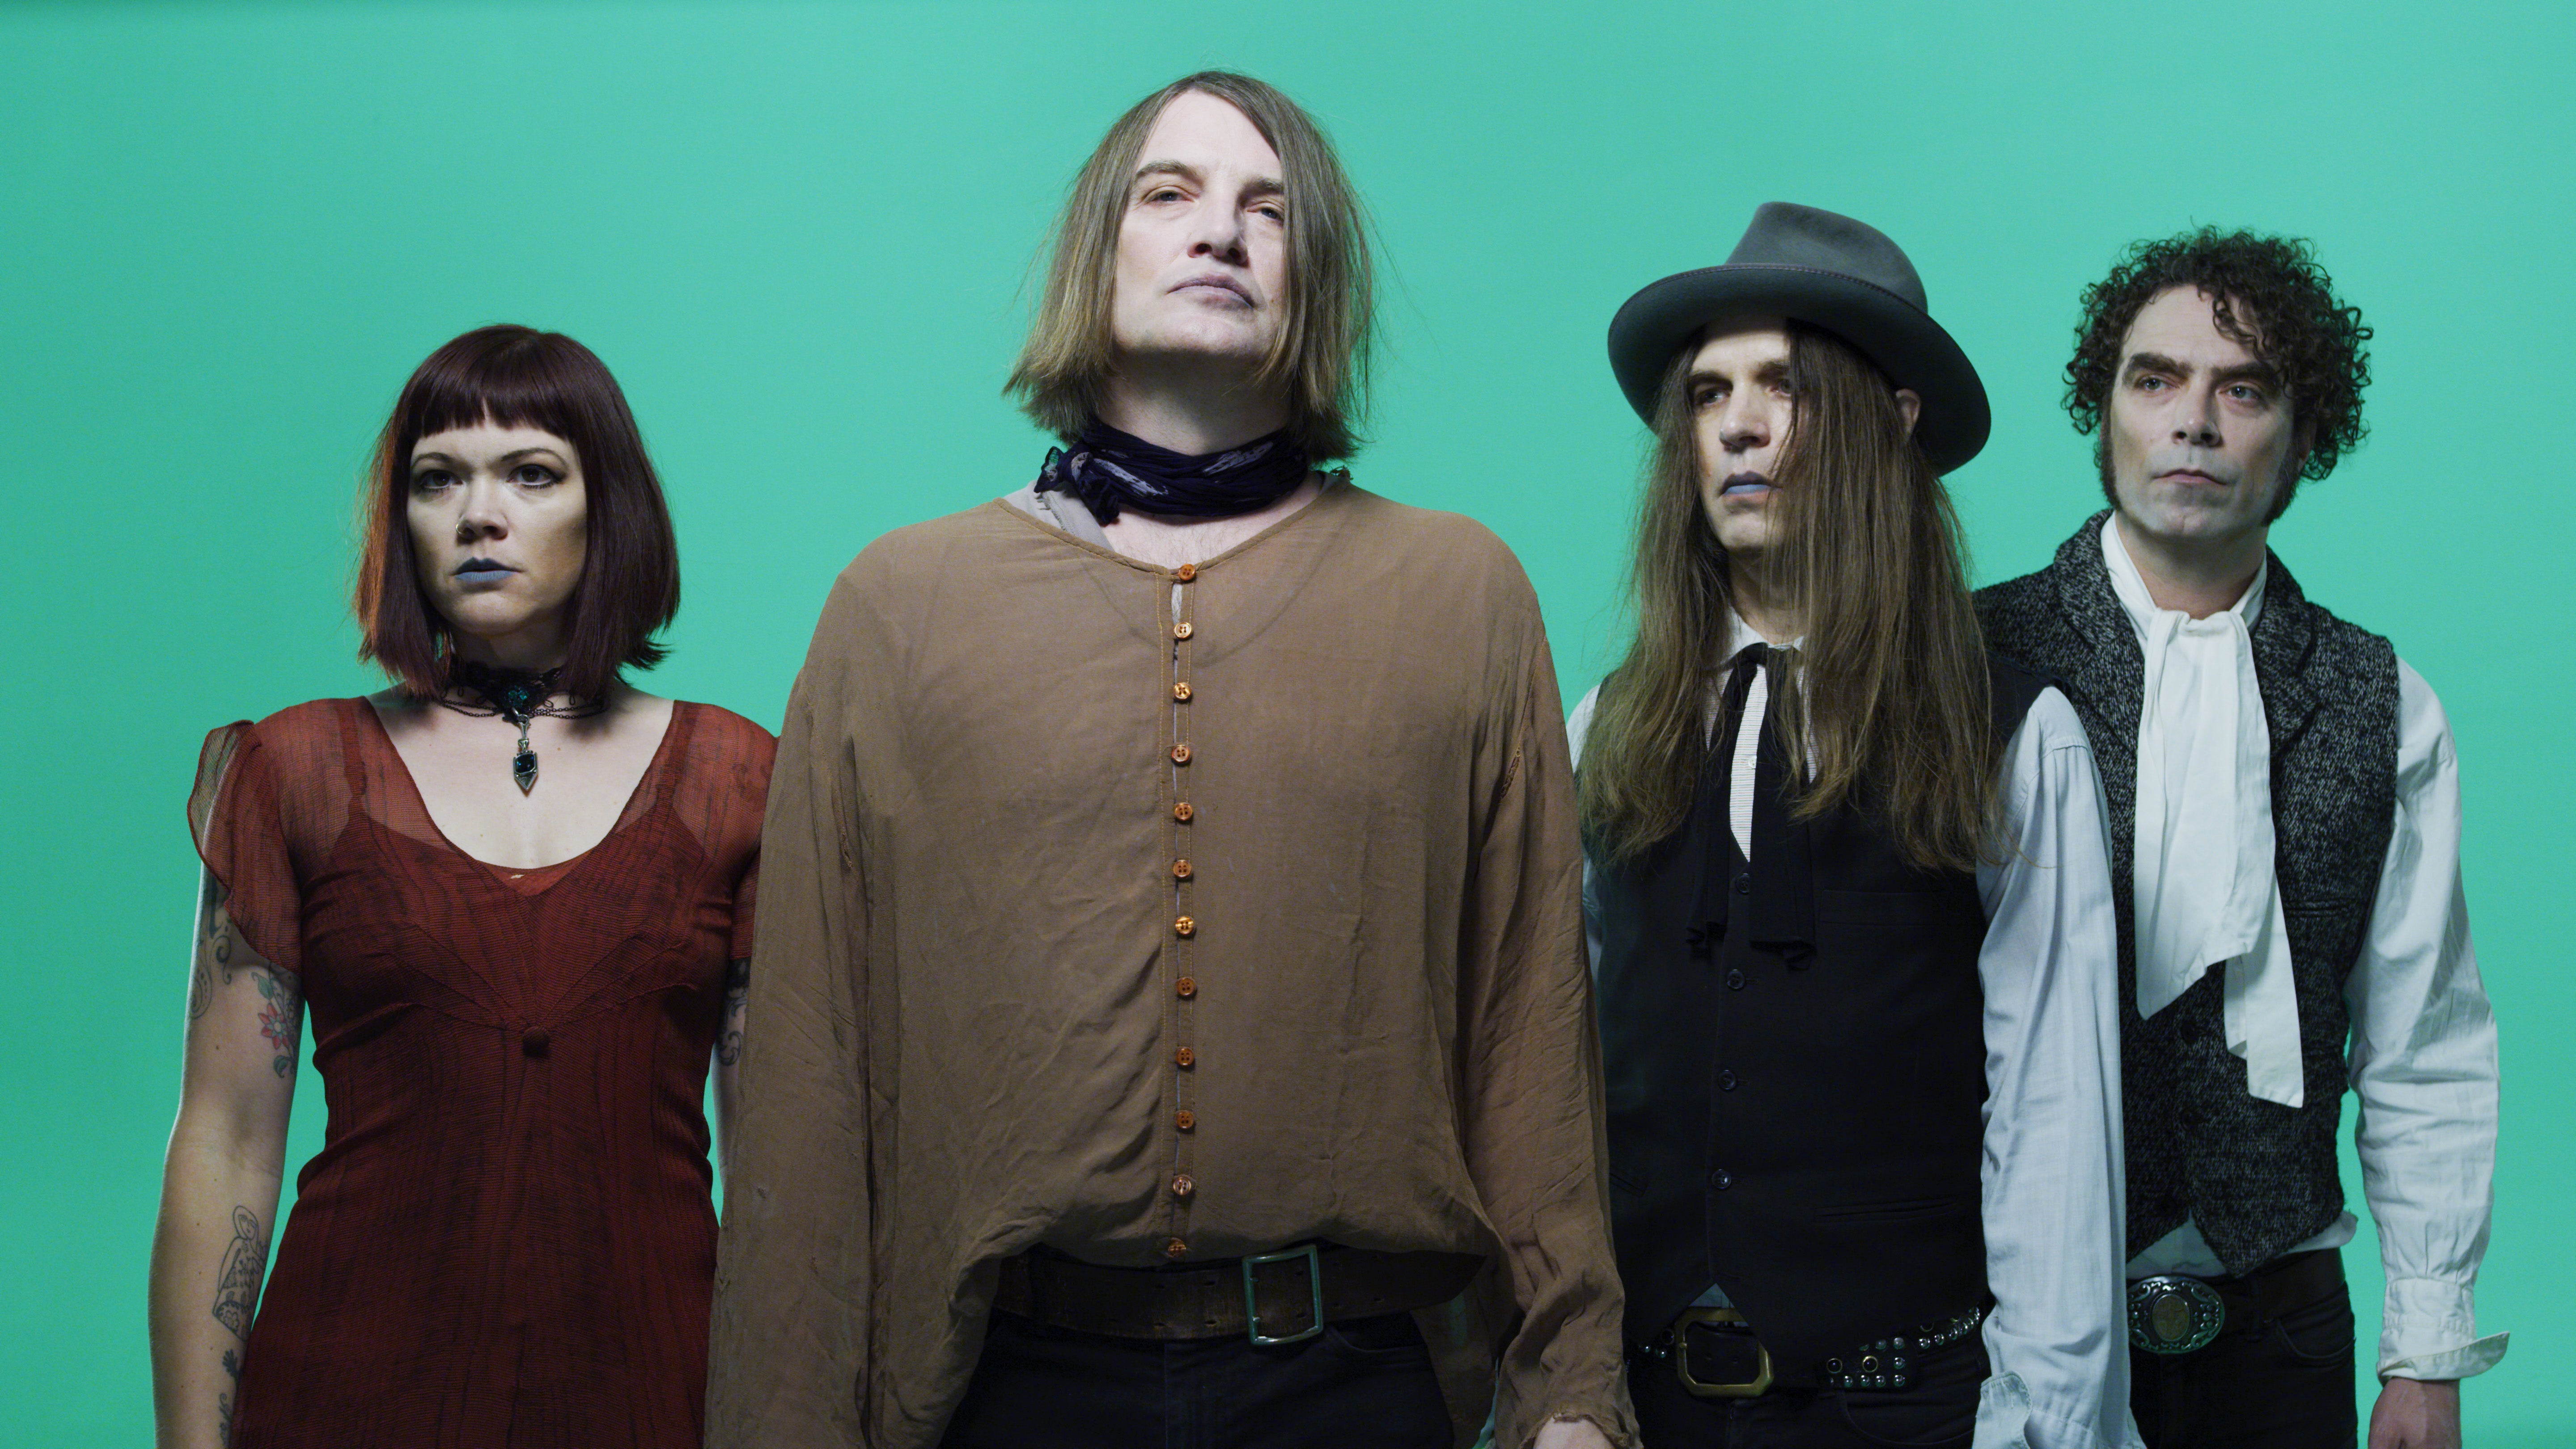 The Dandy Warhols + The Black Angels in Glasgow promo photo for Artist presale offer code